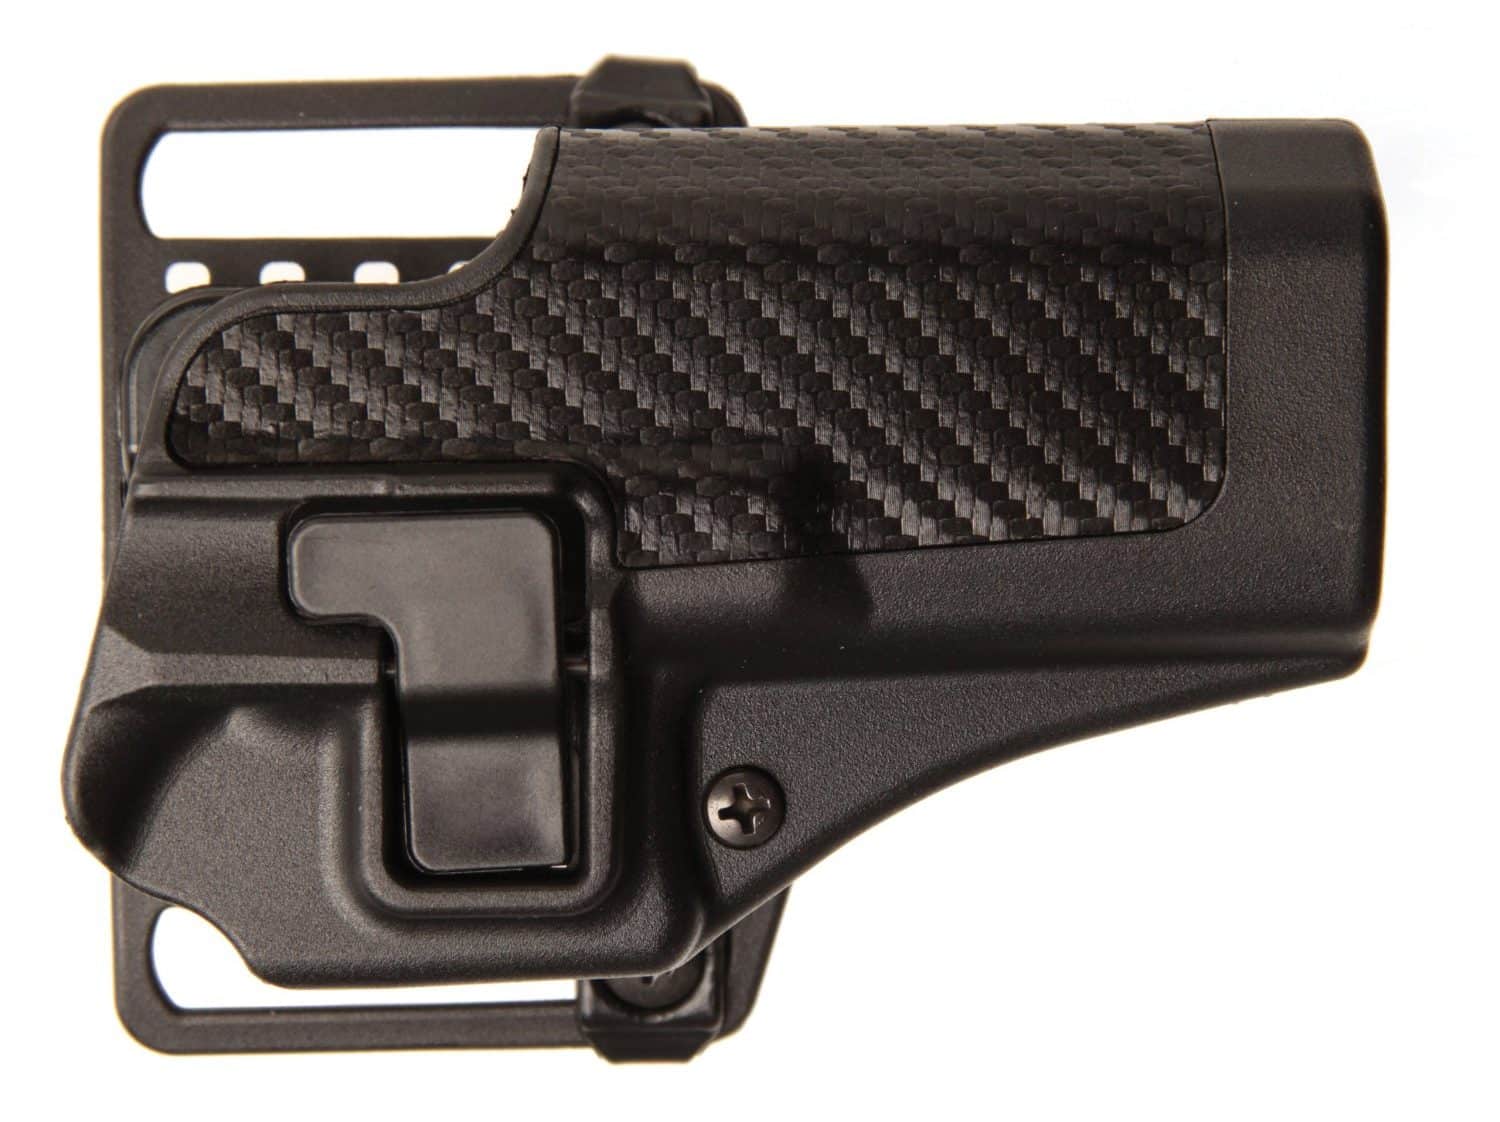  The Blackhawk SERPA CQC Holster has a speed cut design for easy draw